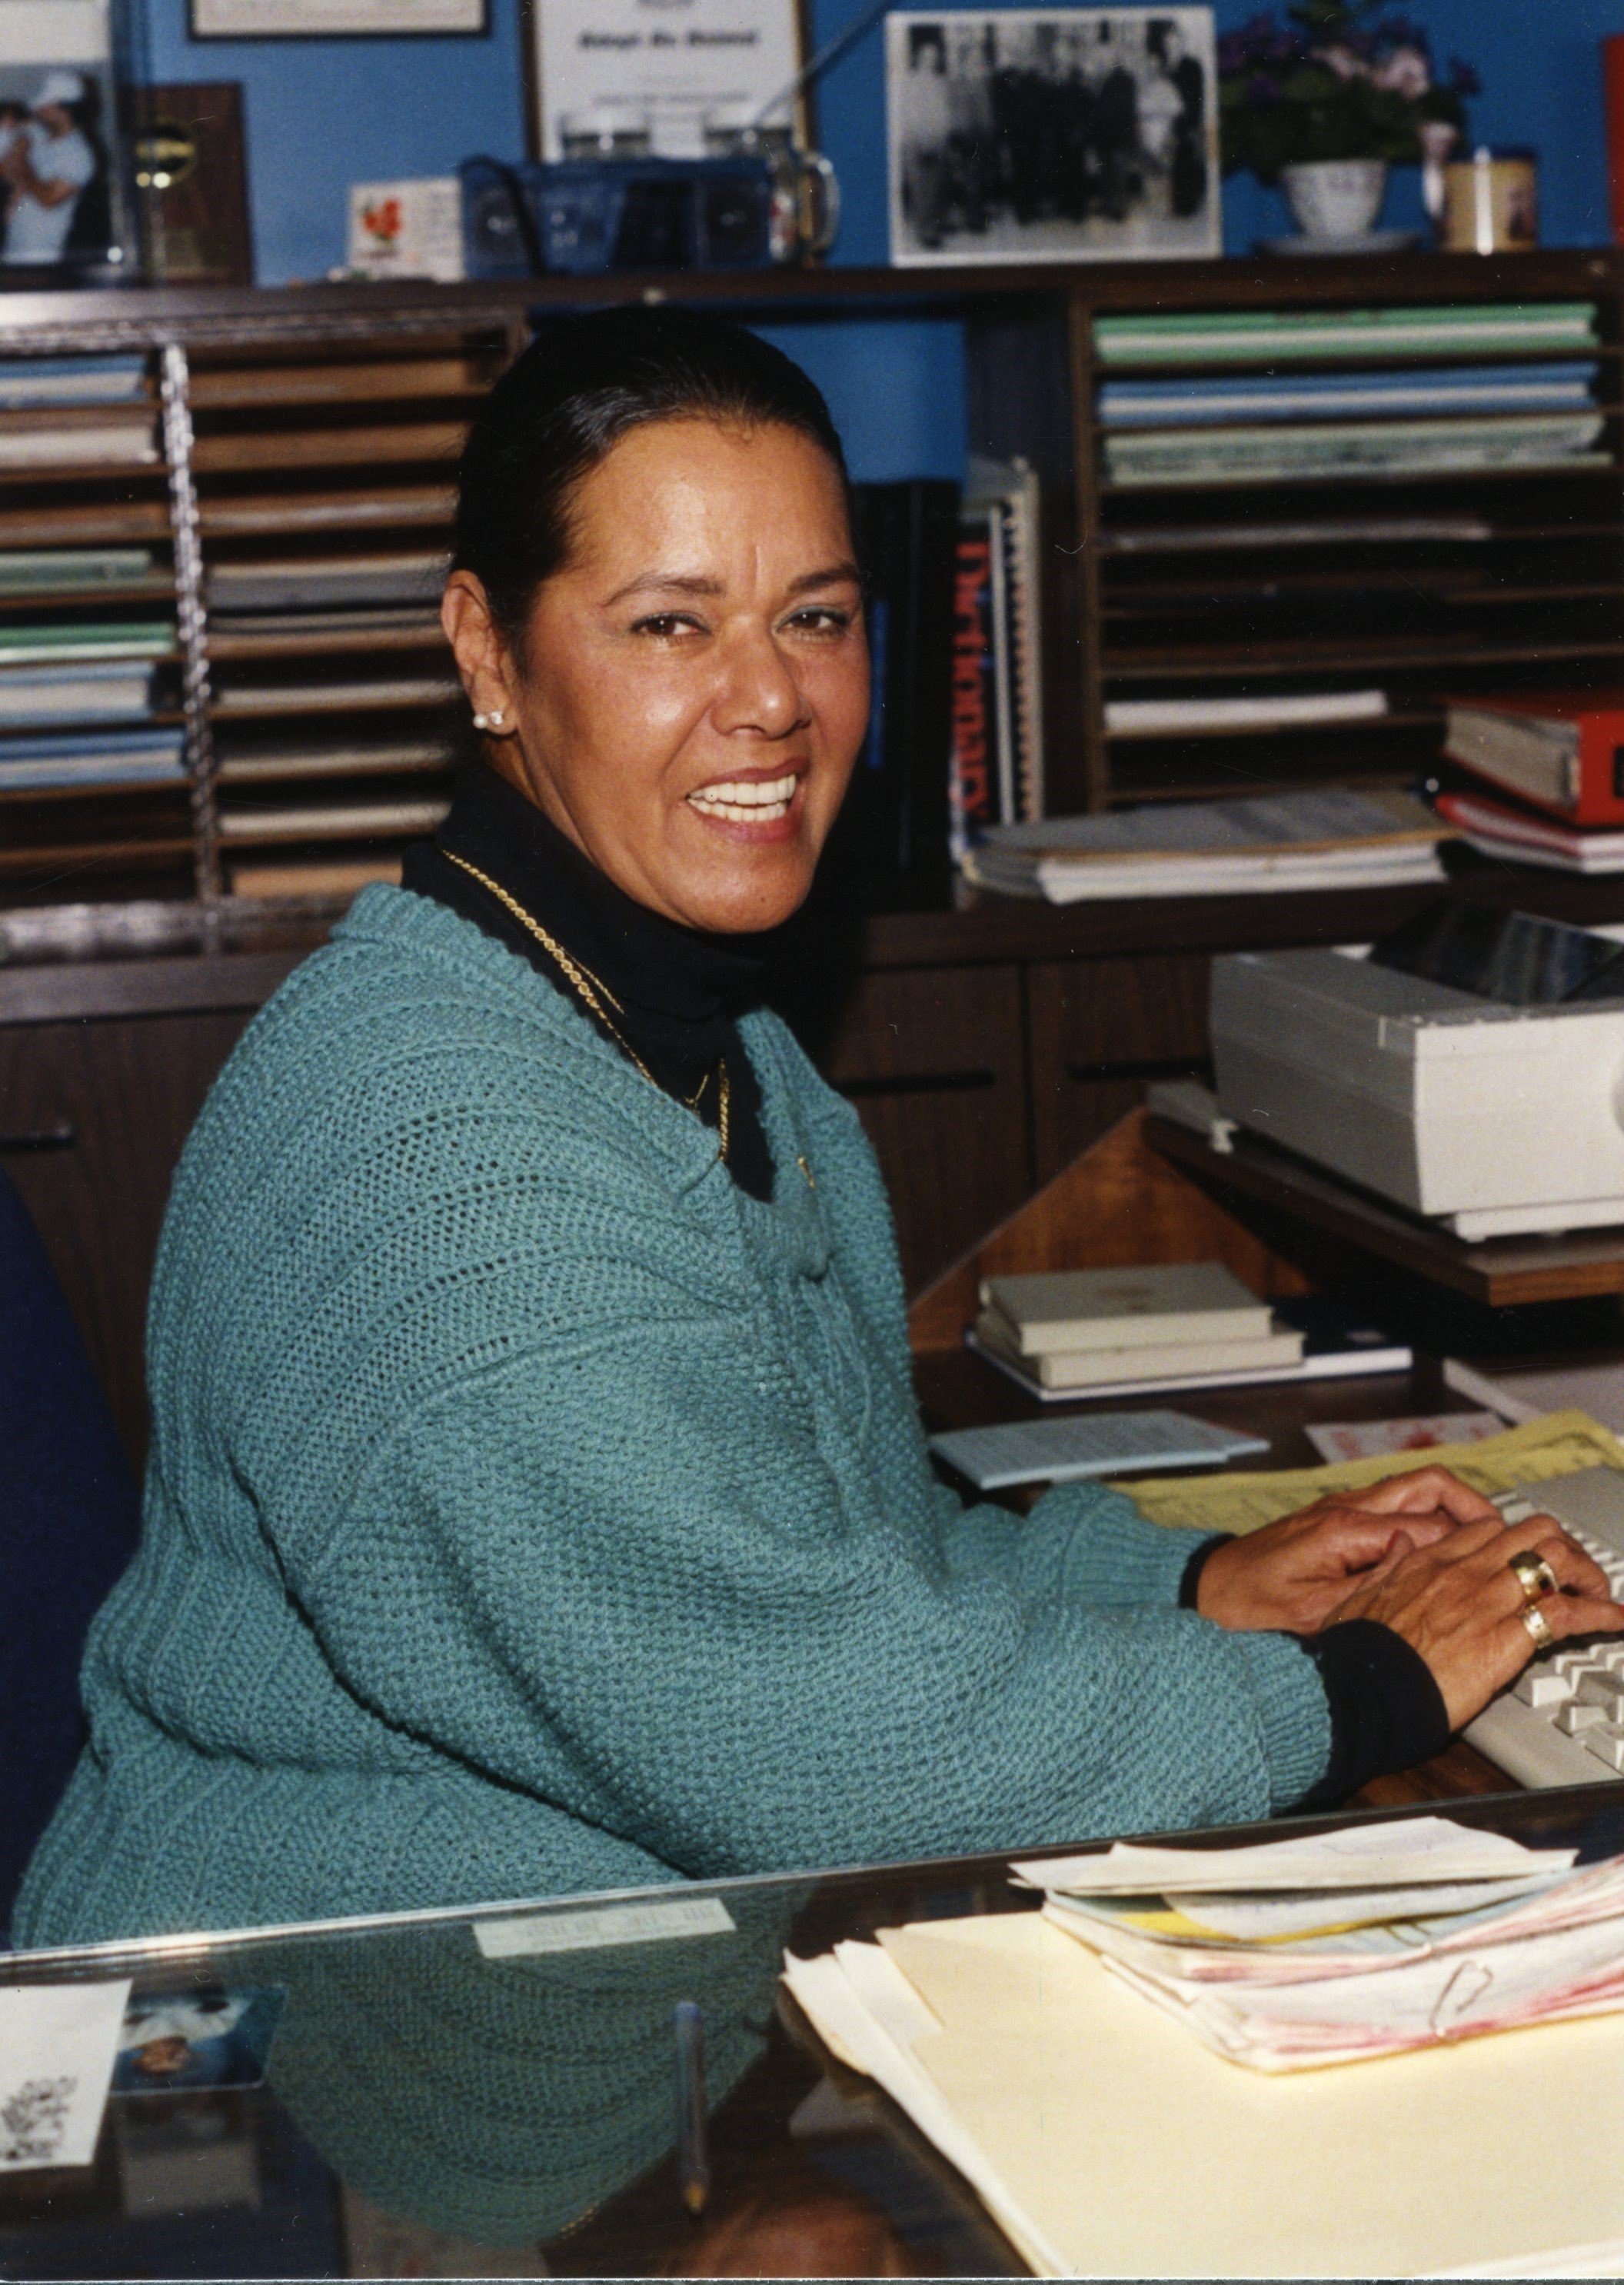 Photograph Of Marial Harper - A Woman With Black Pulled Back Hair, She Is Wearing A Blue Sweater And Typing On A Computer Keyboard